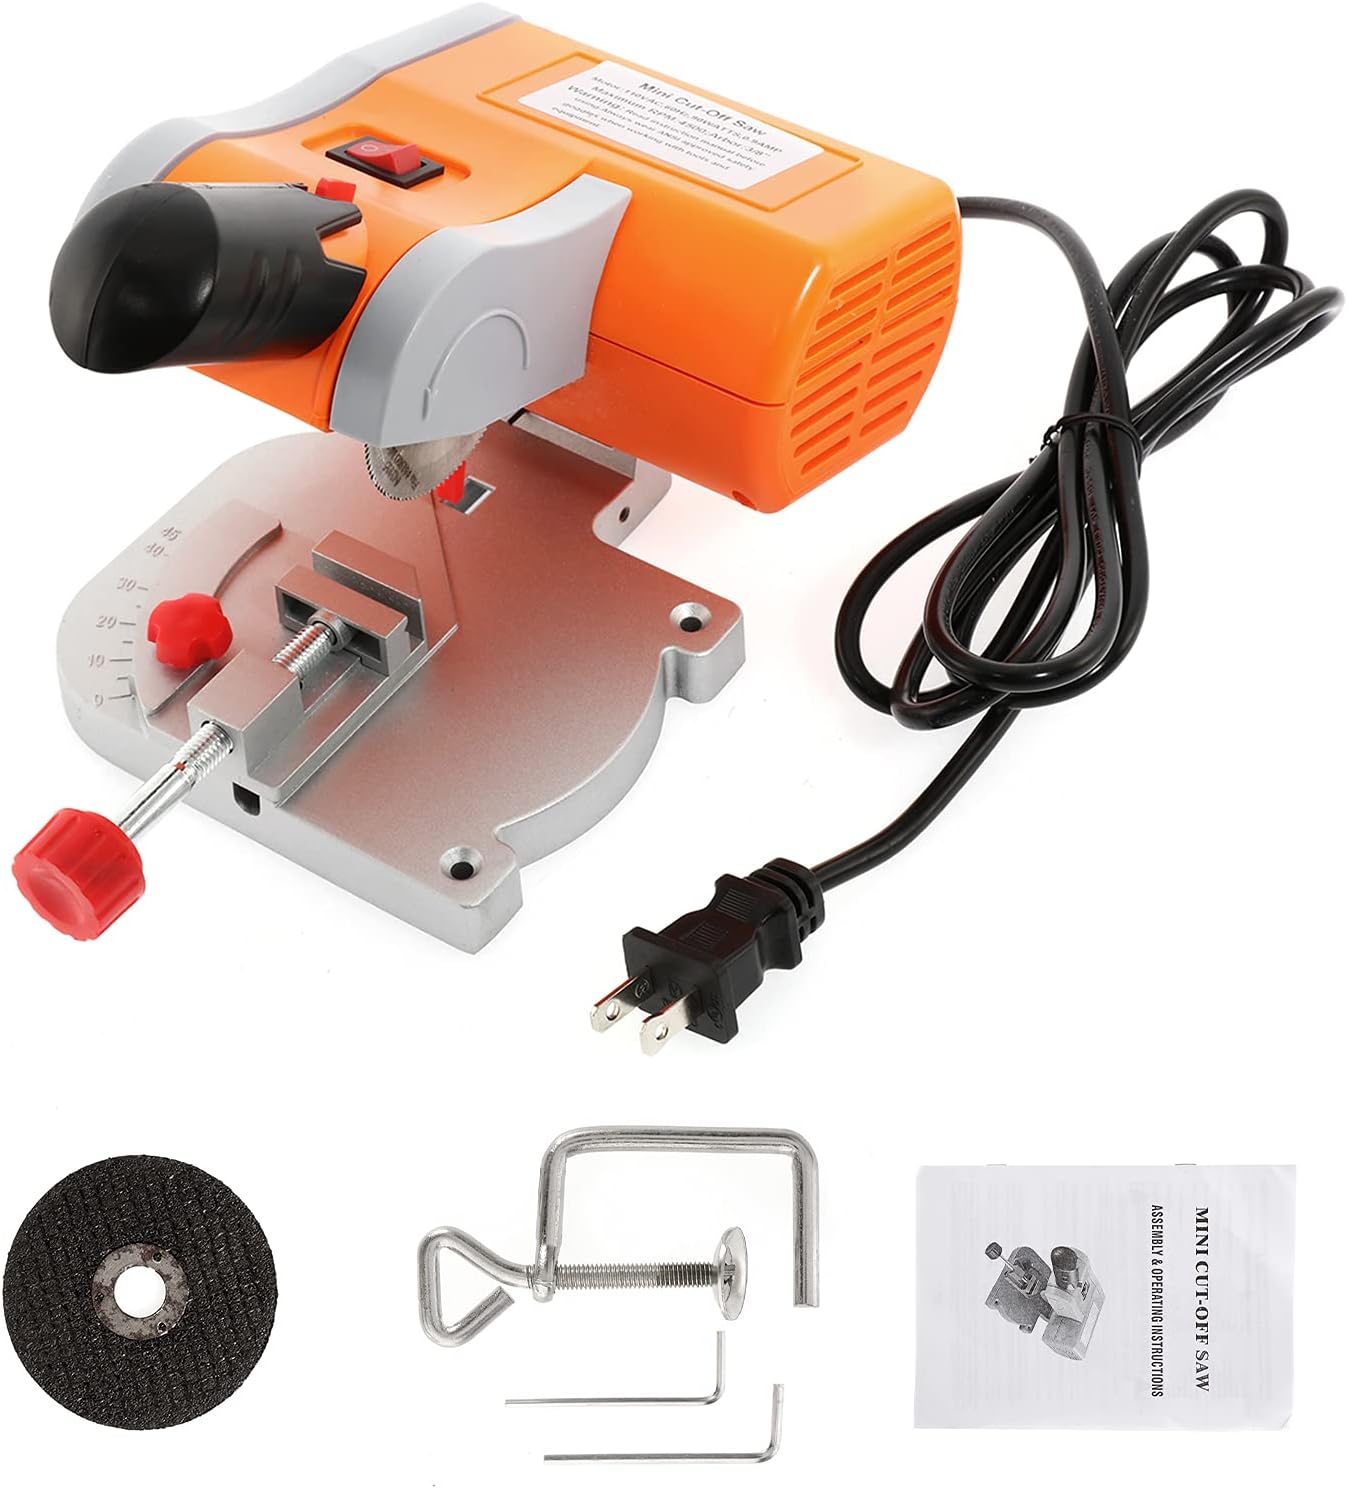 Generic Mini Miter Saw Electric Power Table Saw Benchtop Cut-Off Chop Saw Max 45 Degree Cutting for Metal Wood Working Crafts Miniature